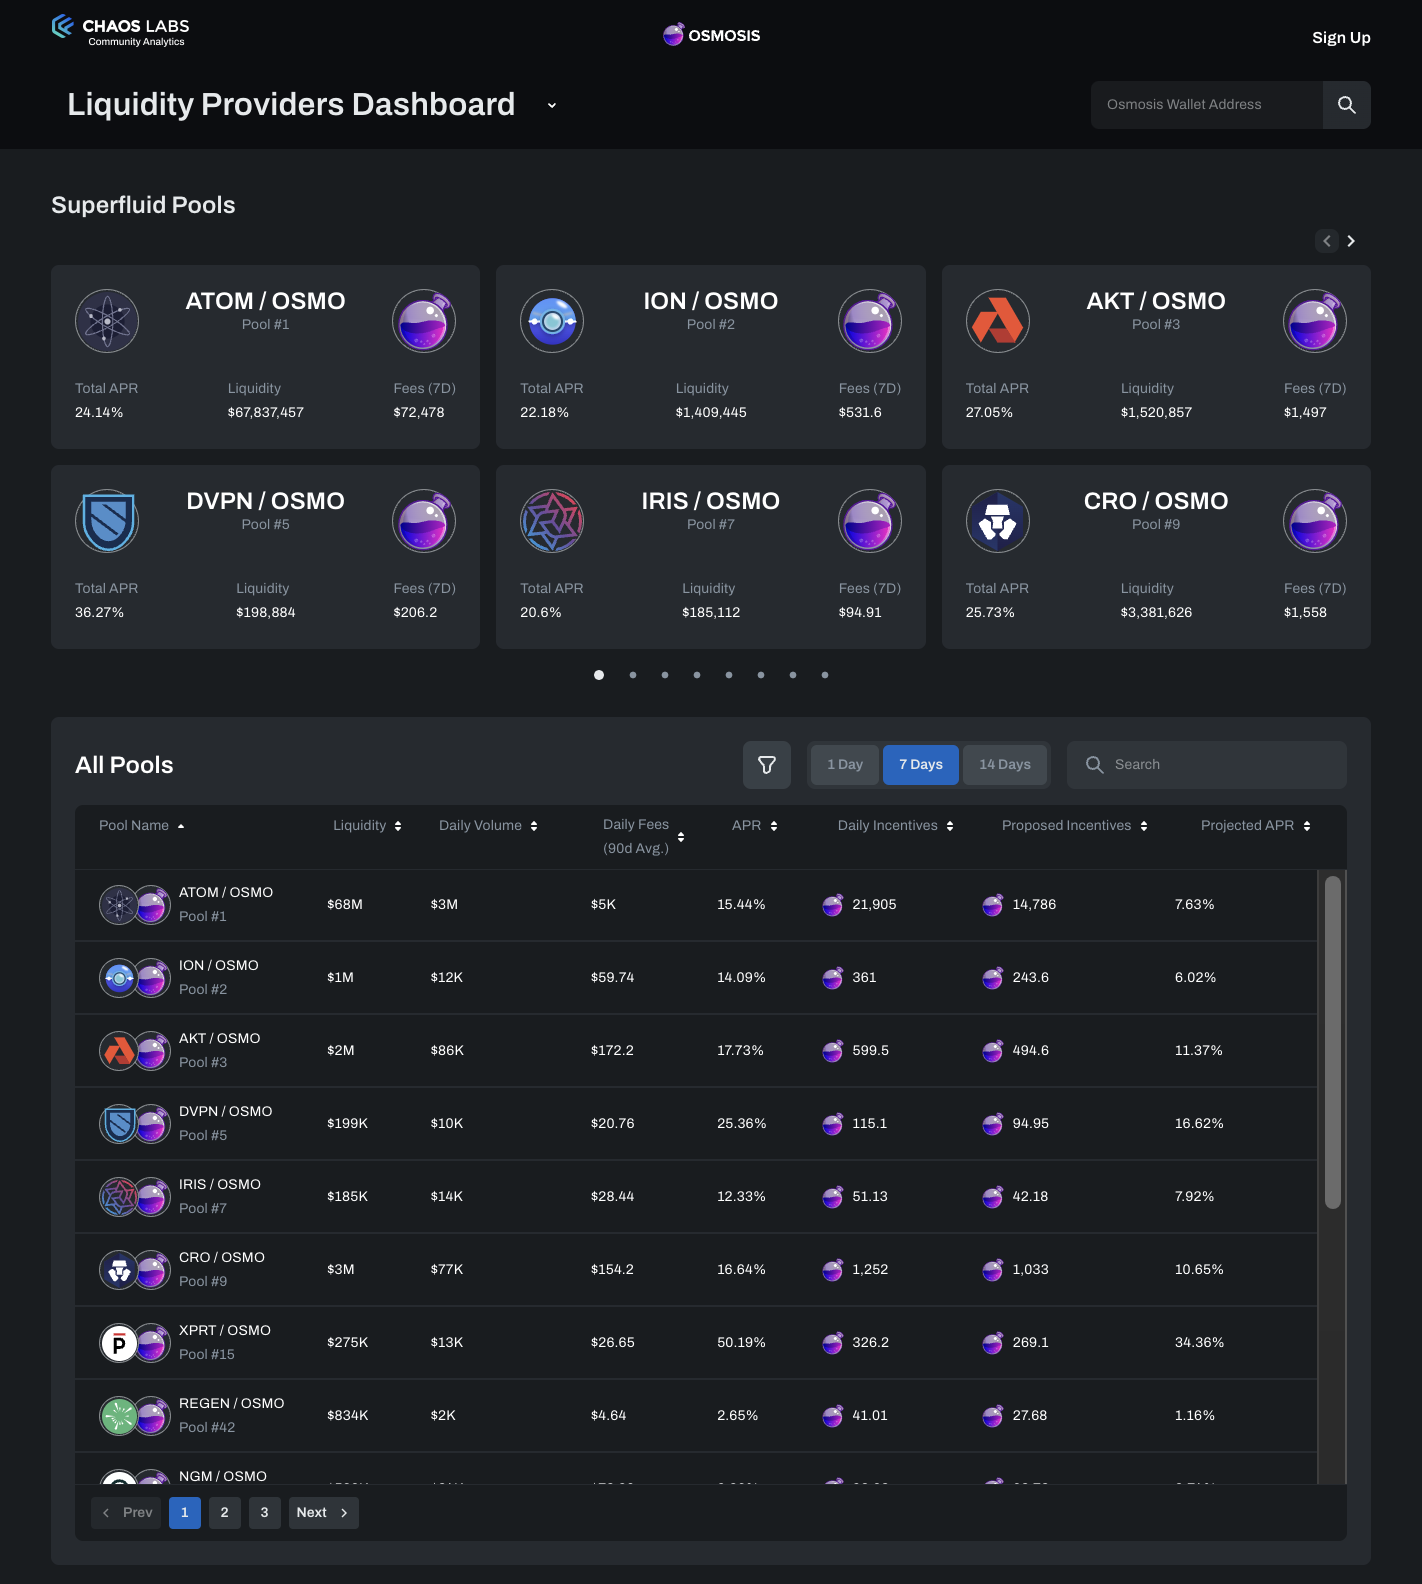 LP Dashboard Overview